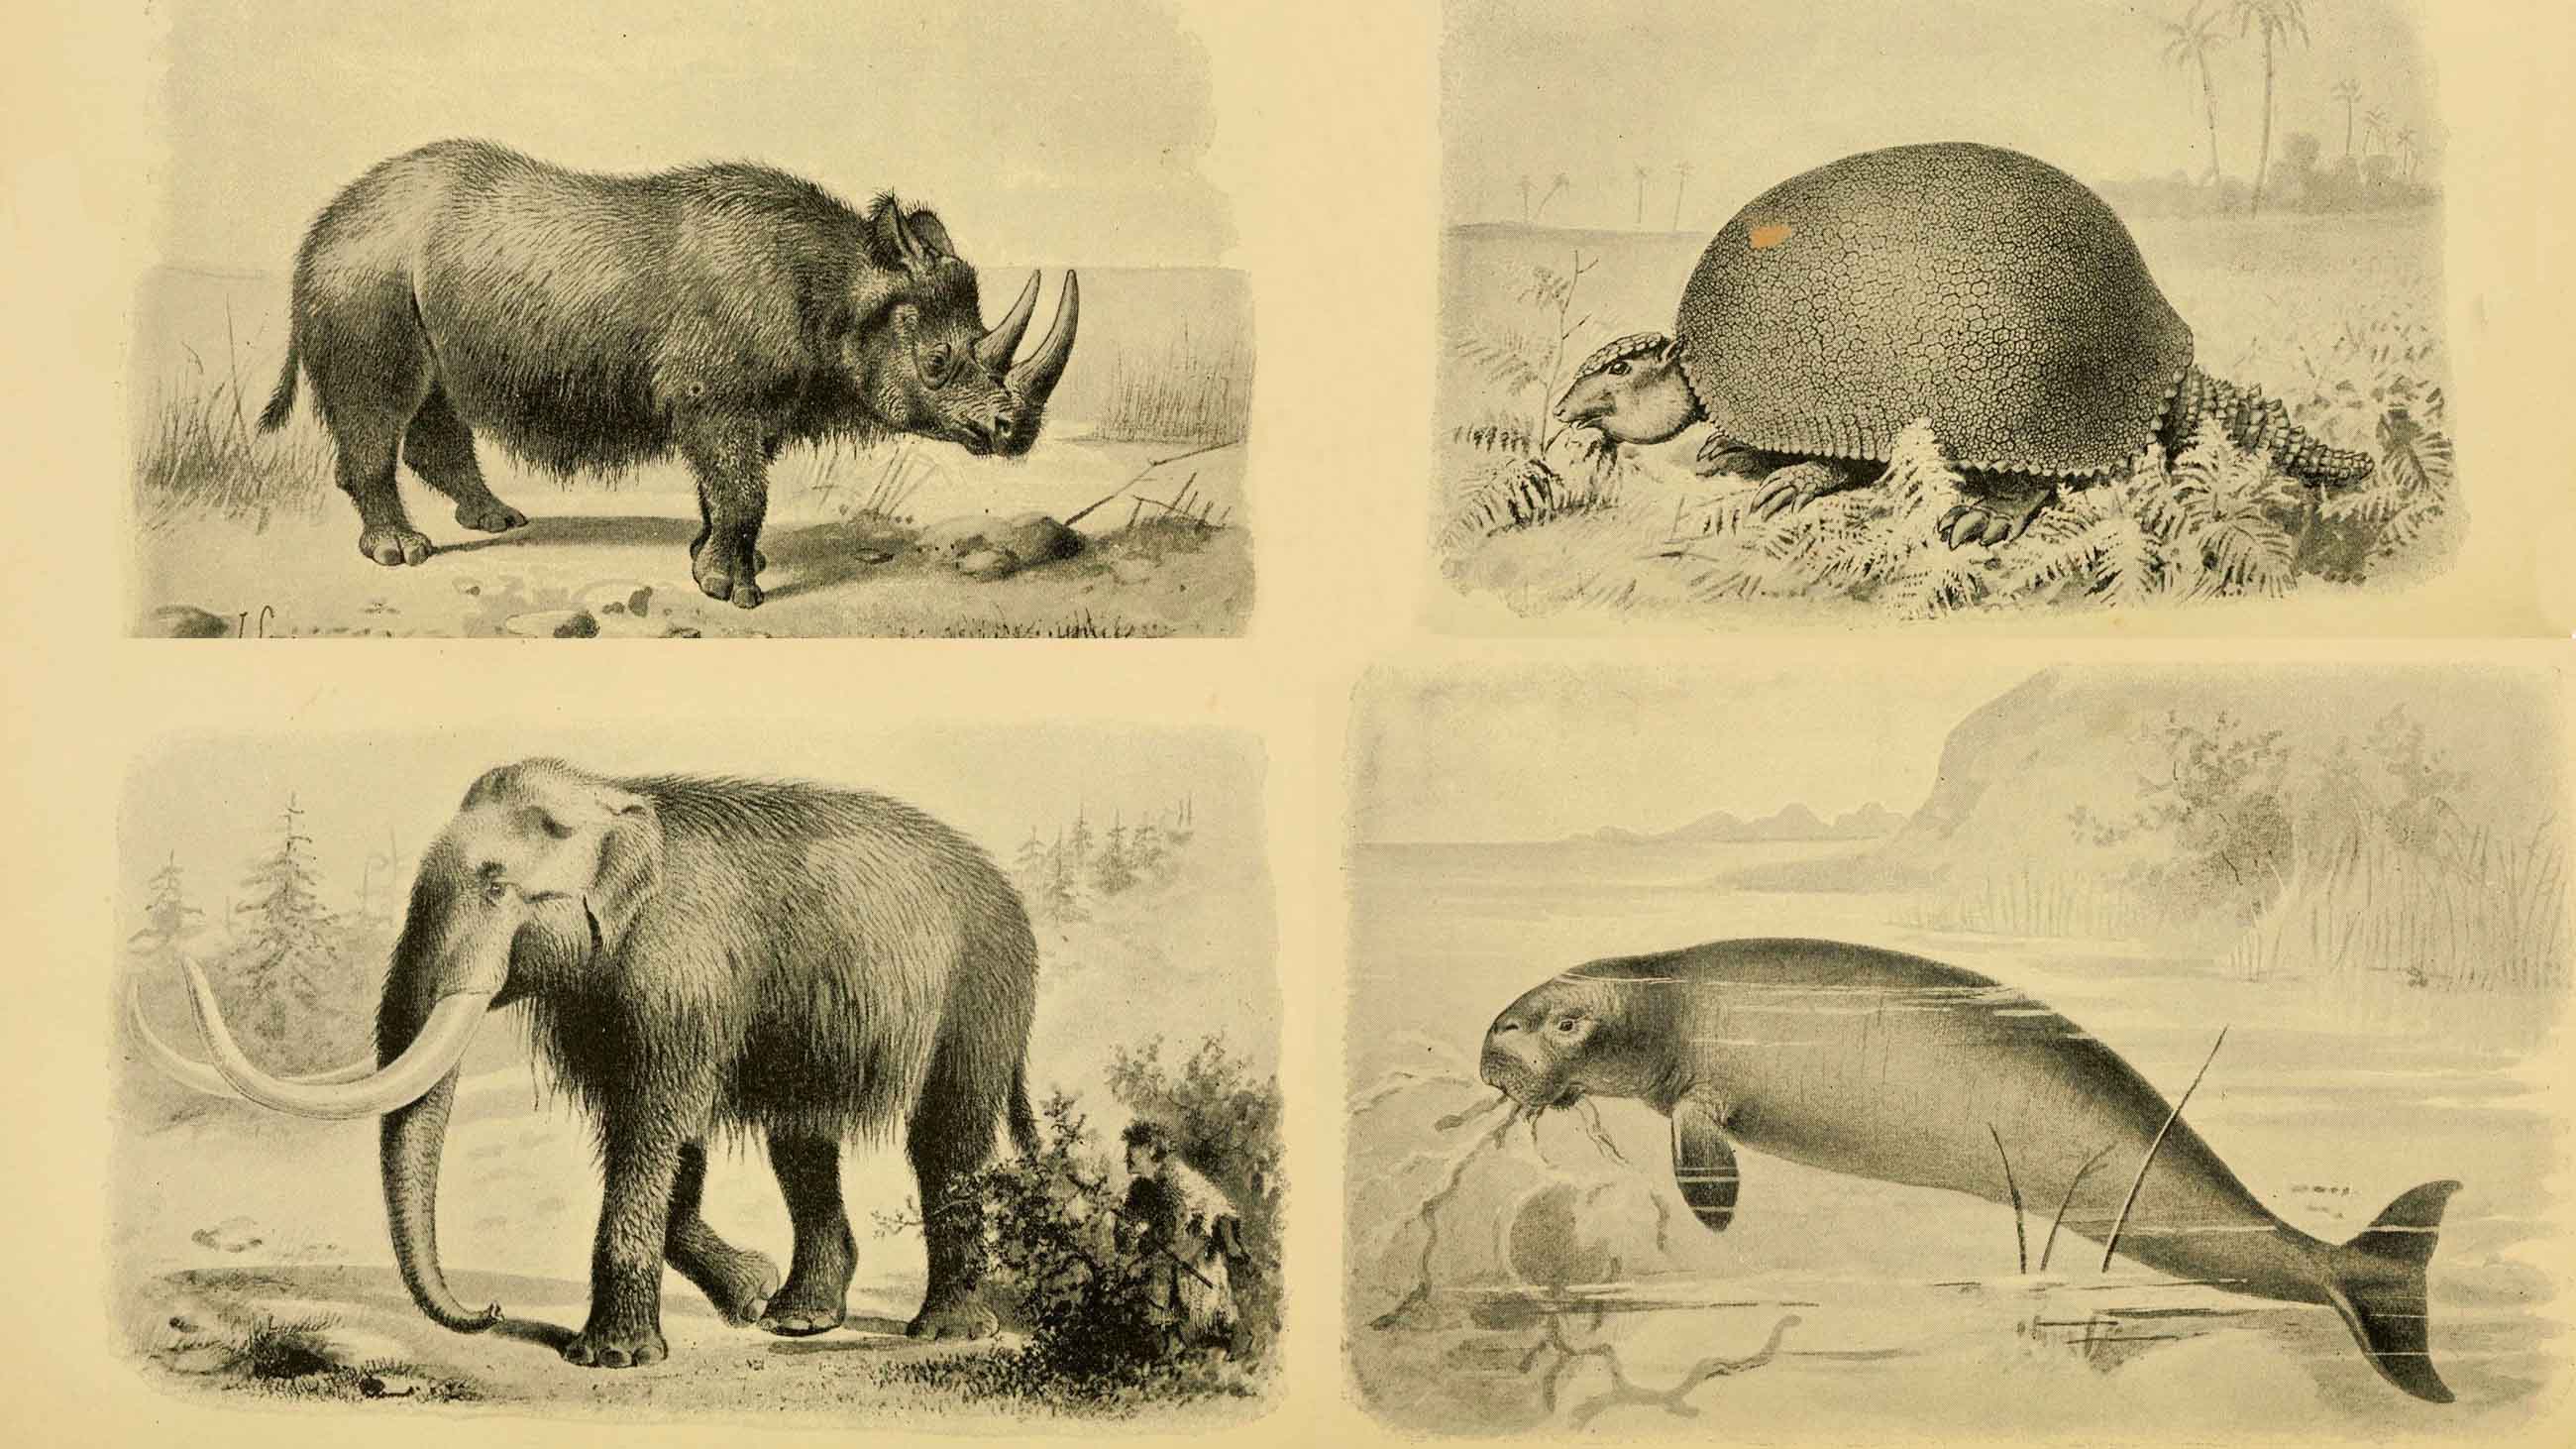 What Makes Some Species More Likely to Go Extinct?